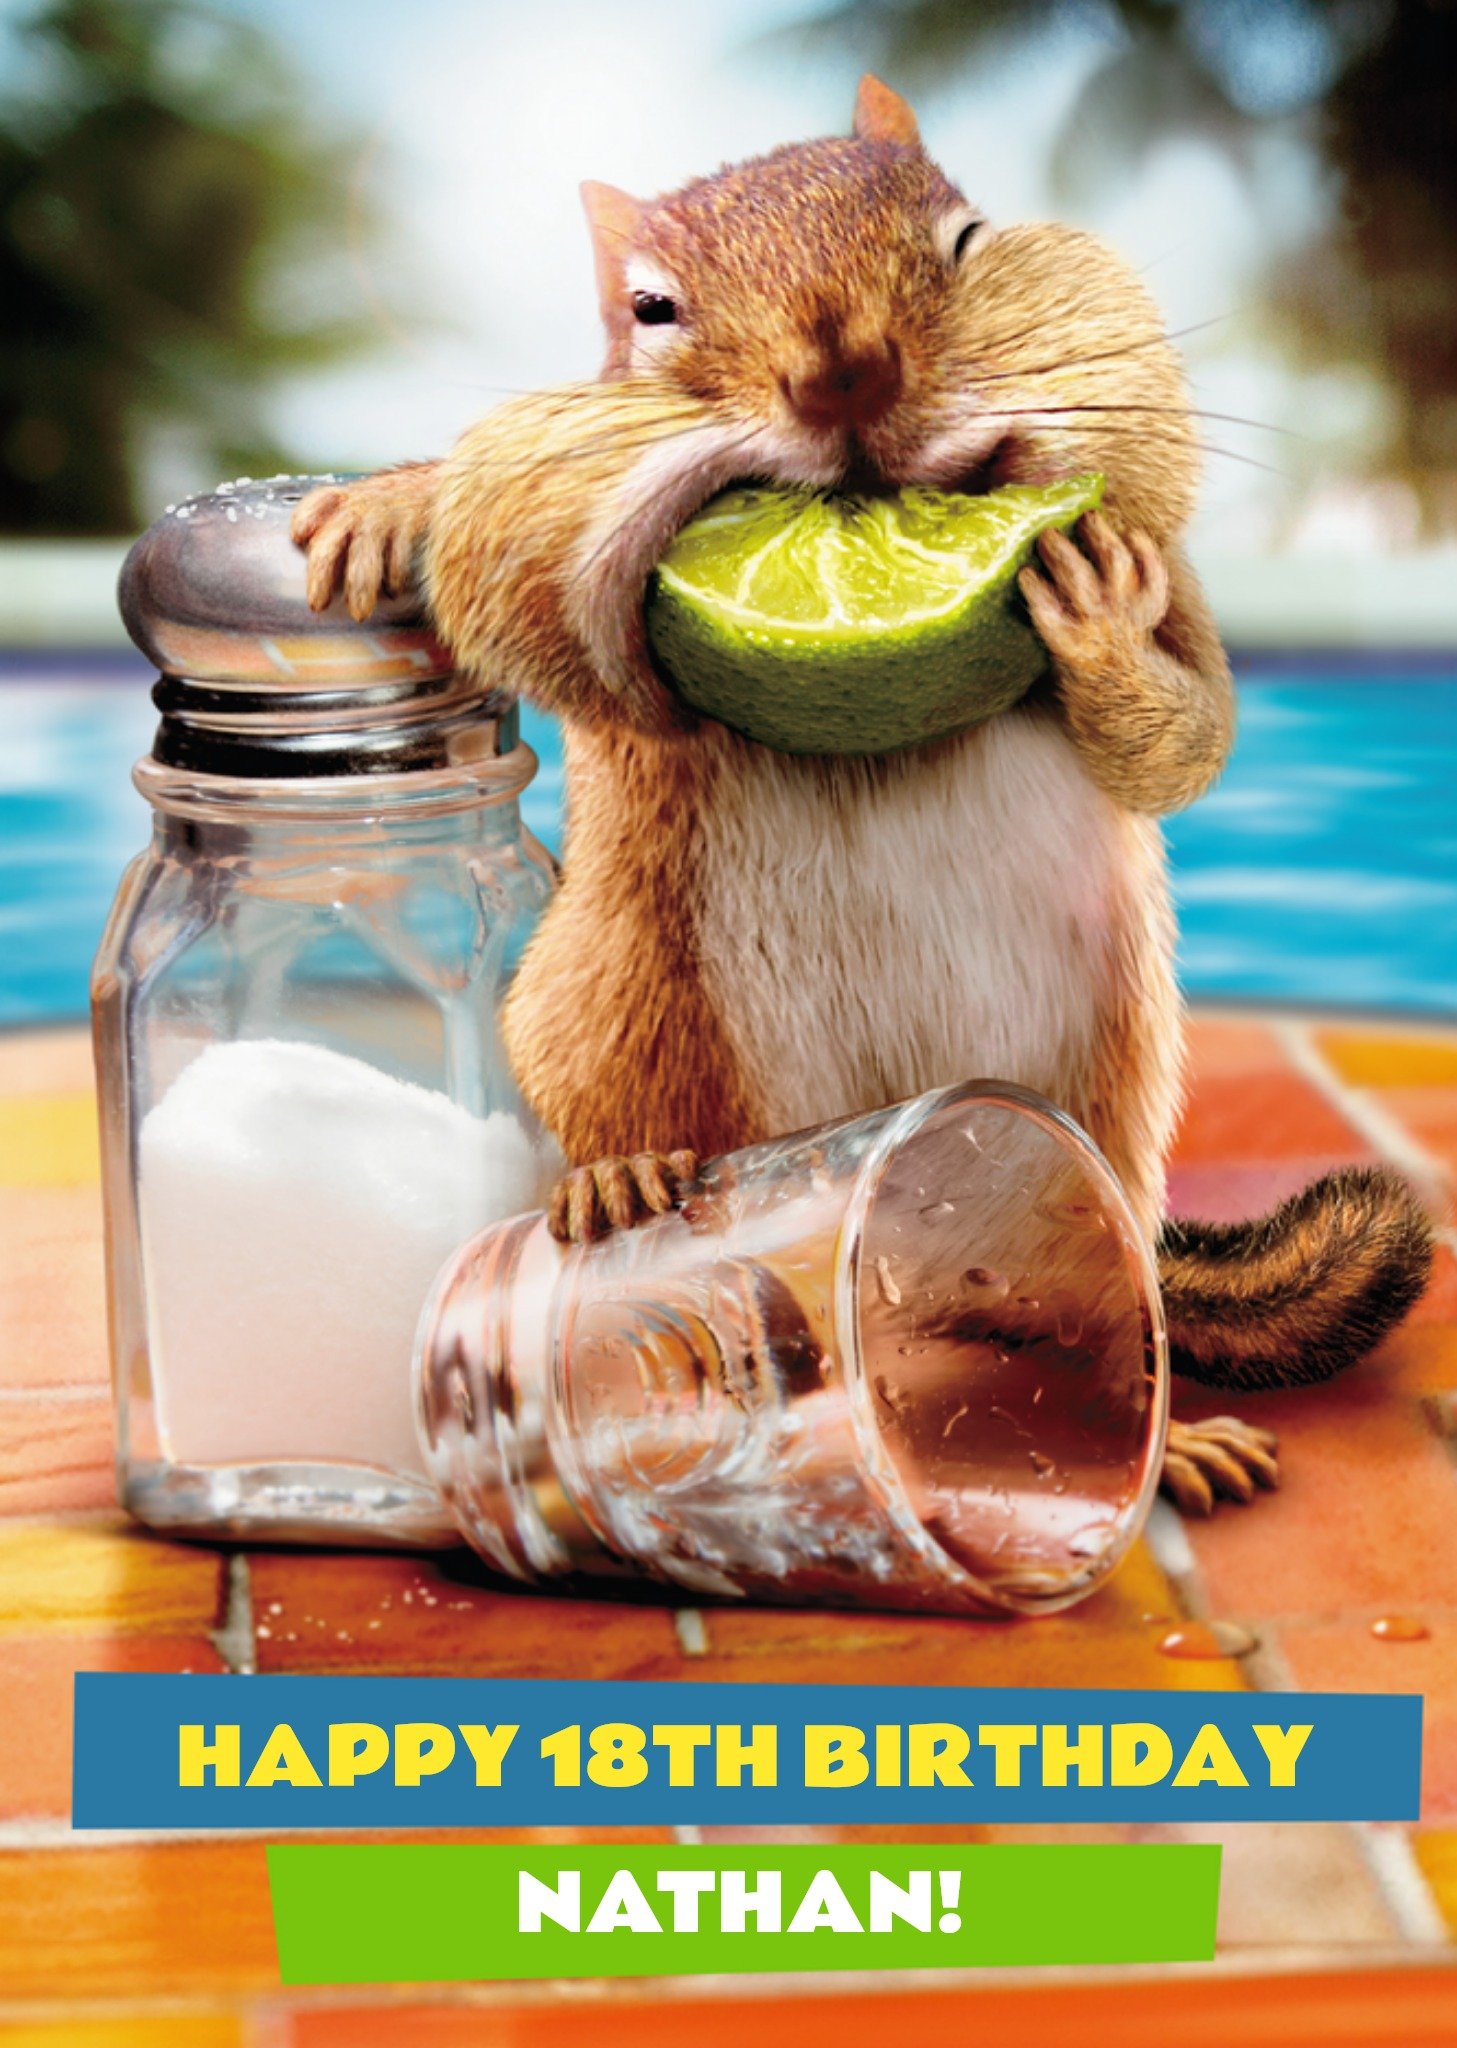 Moonpig Chipmunk And Tequila Birthday Card, Large